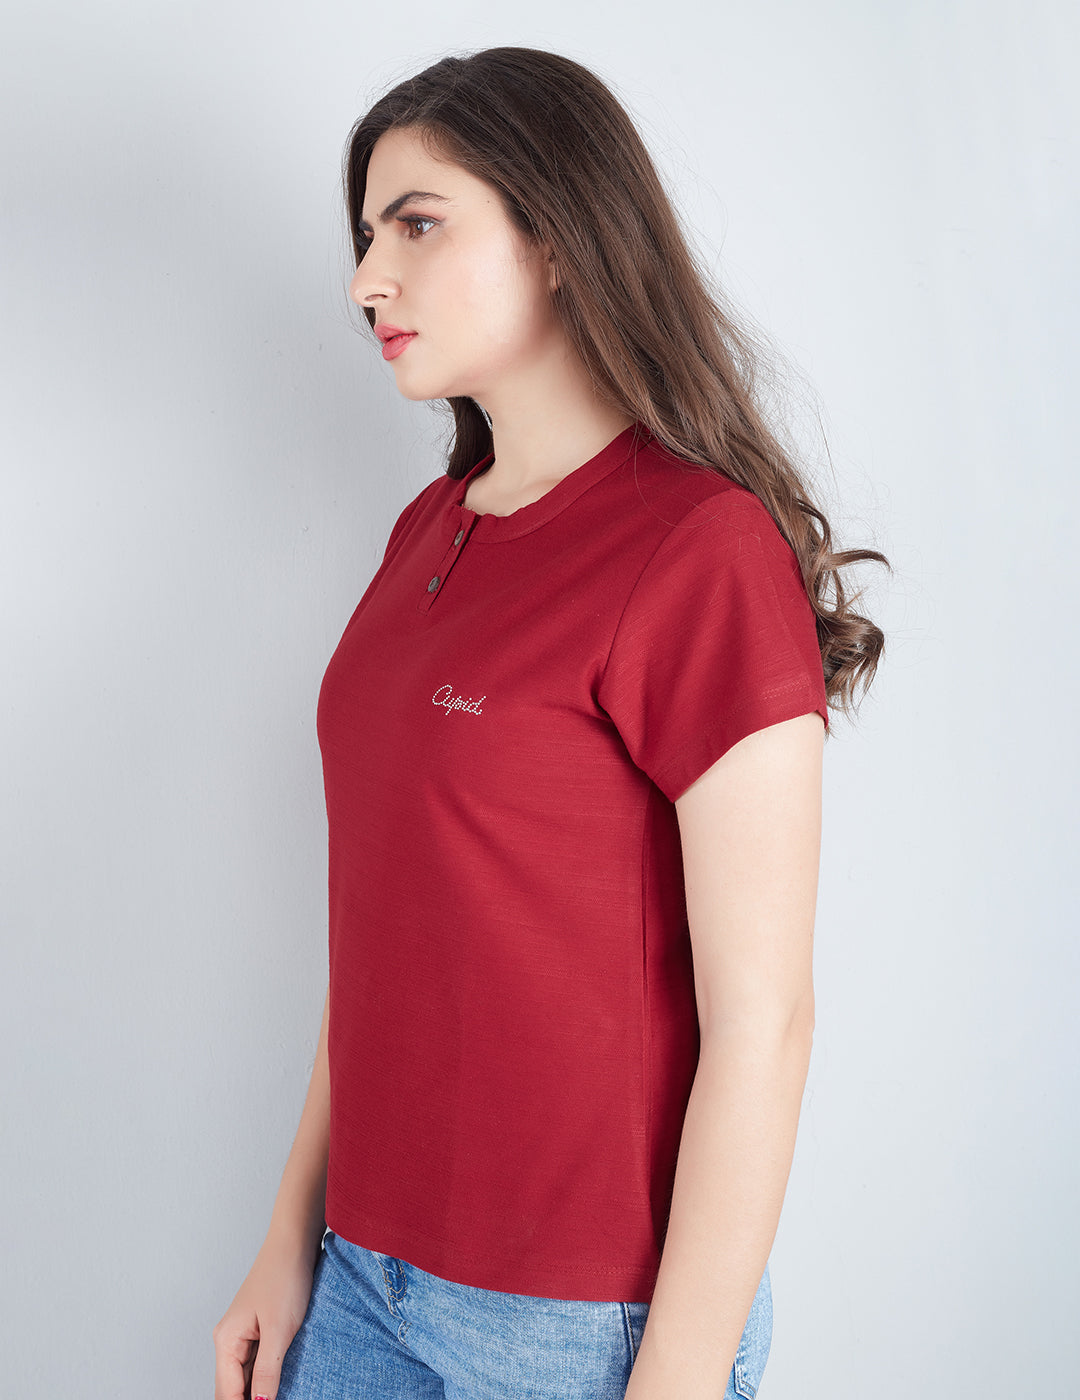 Stylish Maroon Plain Cotton Short T-shirts For Women Online In India